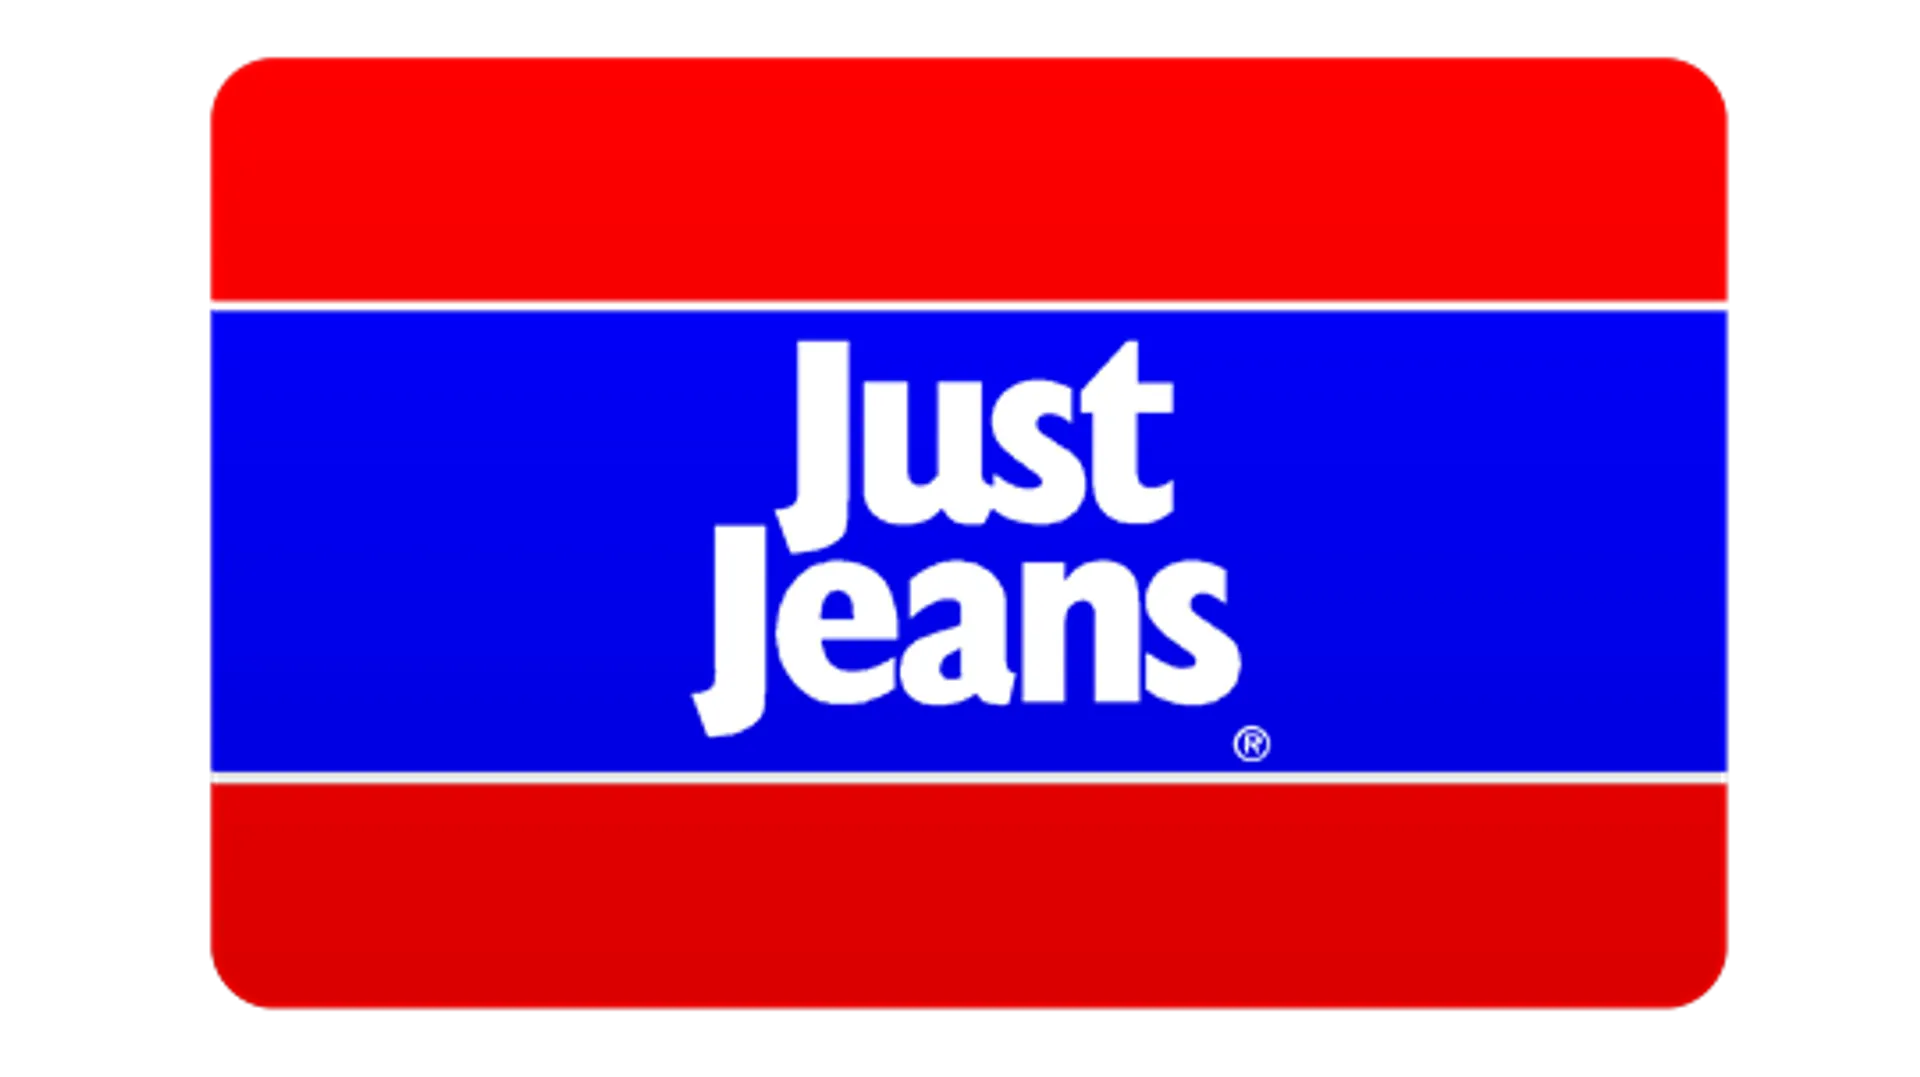 JUST JEANS logo current weekly ad